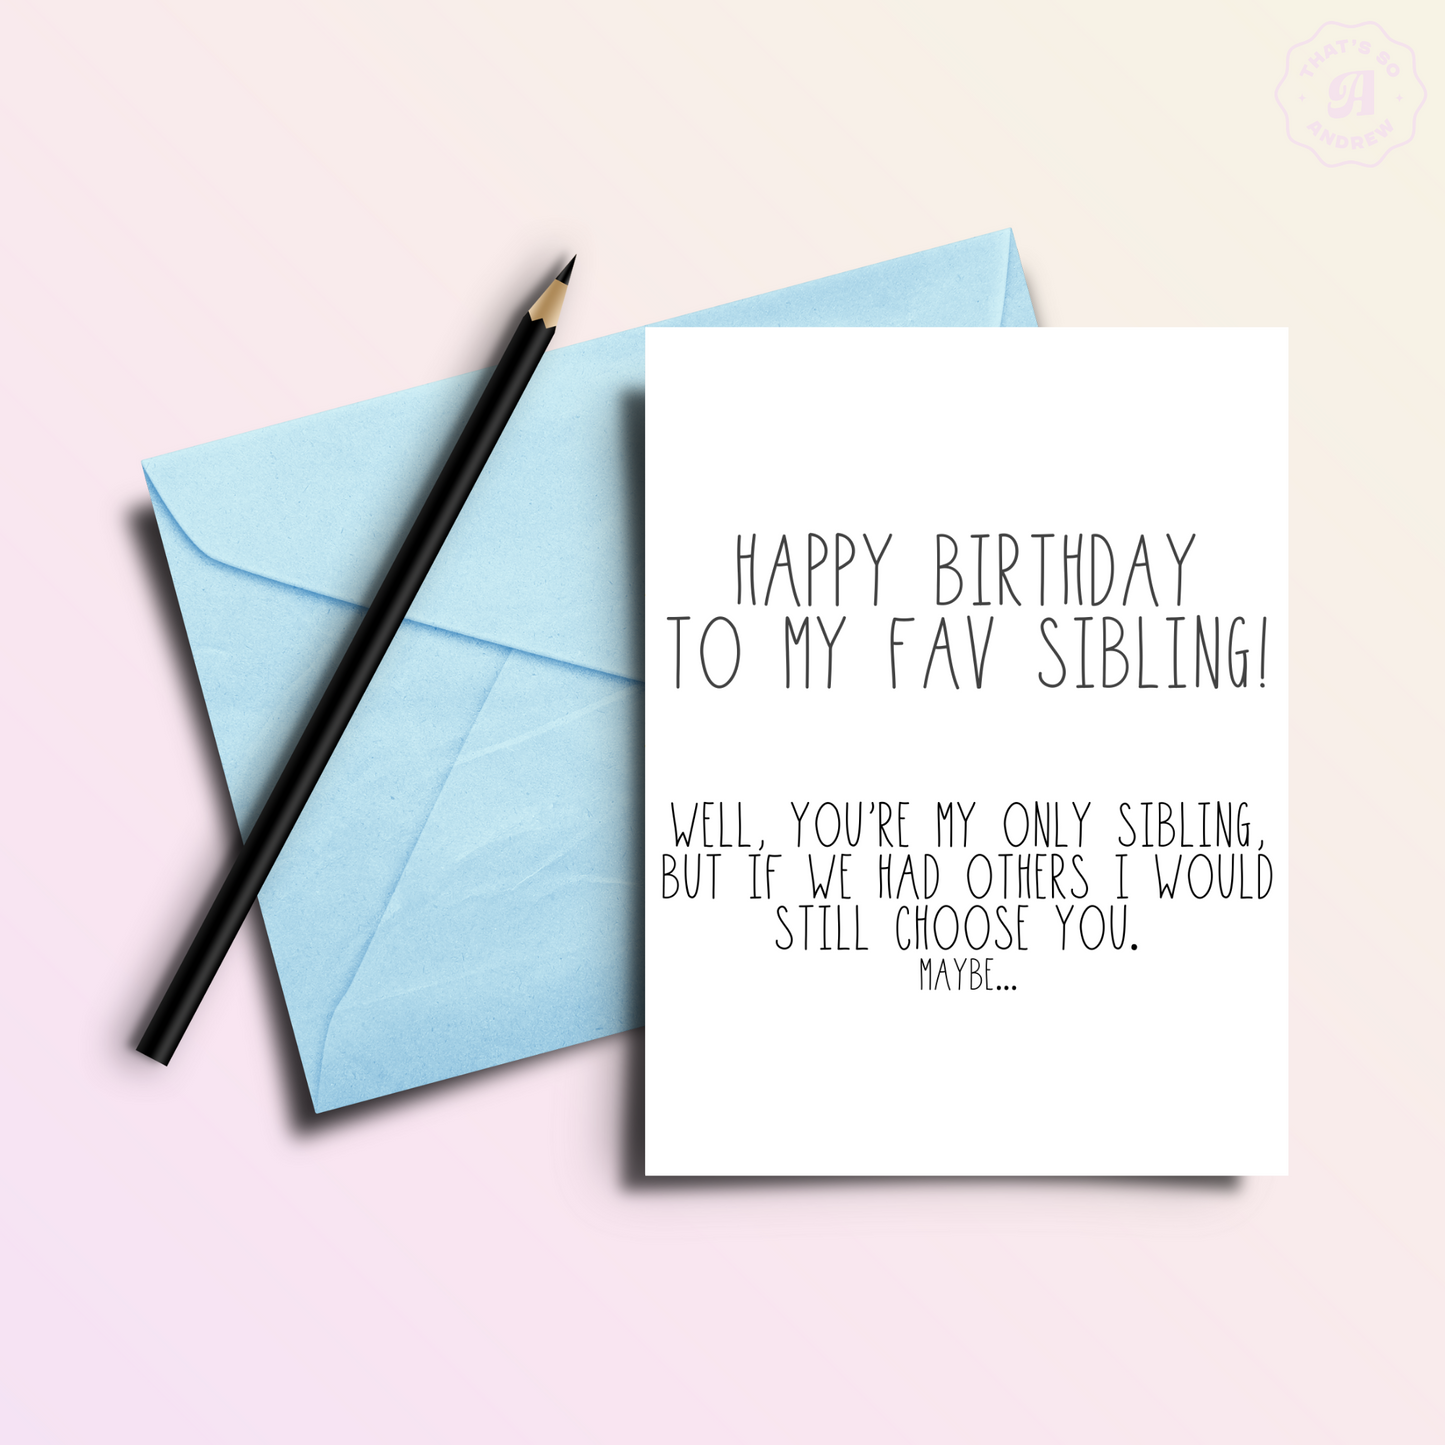 To My Favorite/Only Sibling... Birthday Card